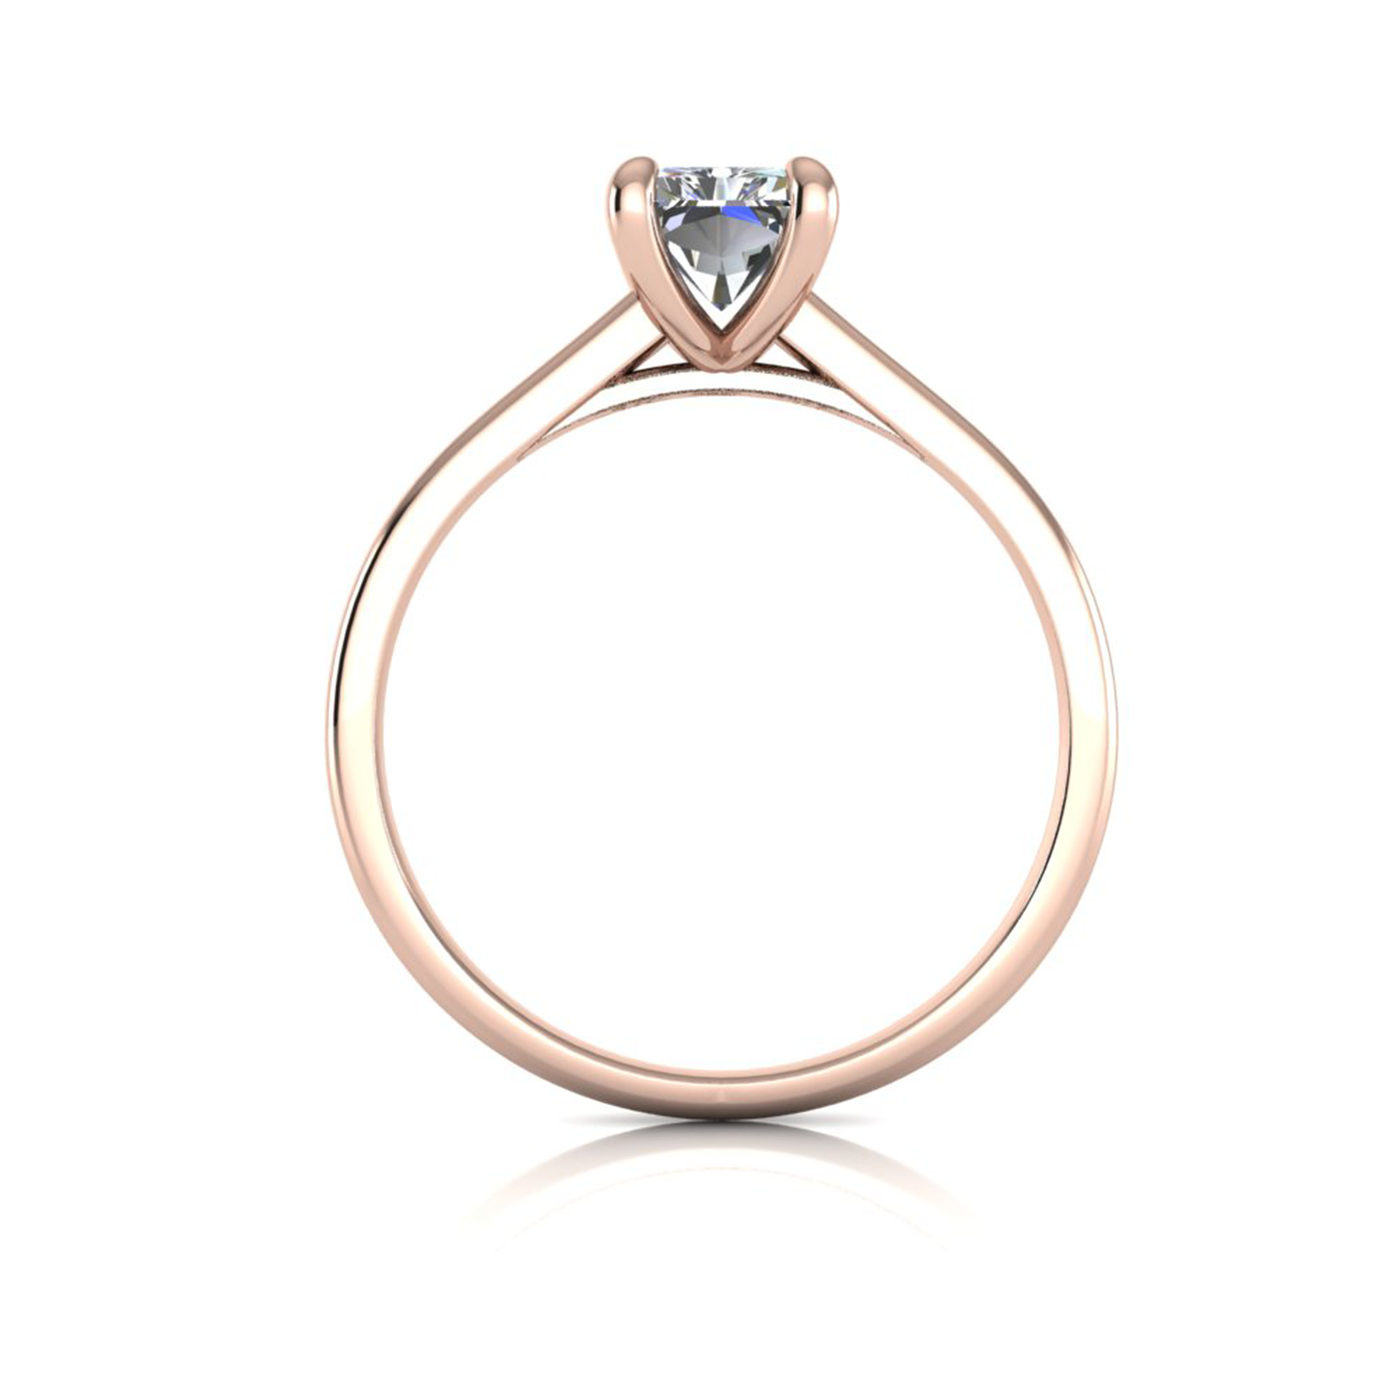 18K ROSE GOLD 4 PRONGS SOLITAIRE RADIANT CUT DIAMOND ENGAGEMENT RING WITH WHISPER THIN BAND